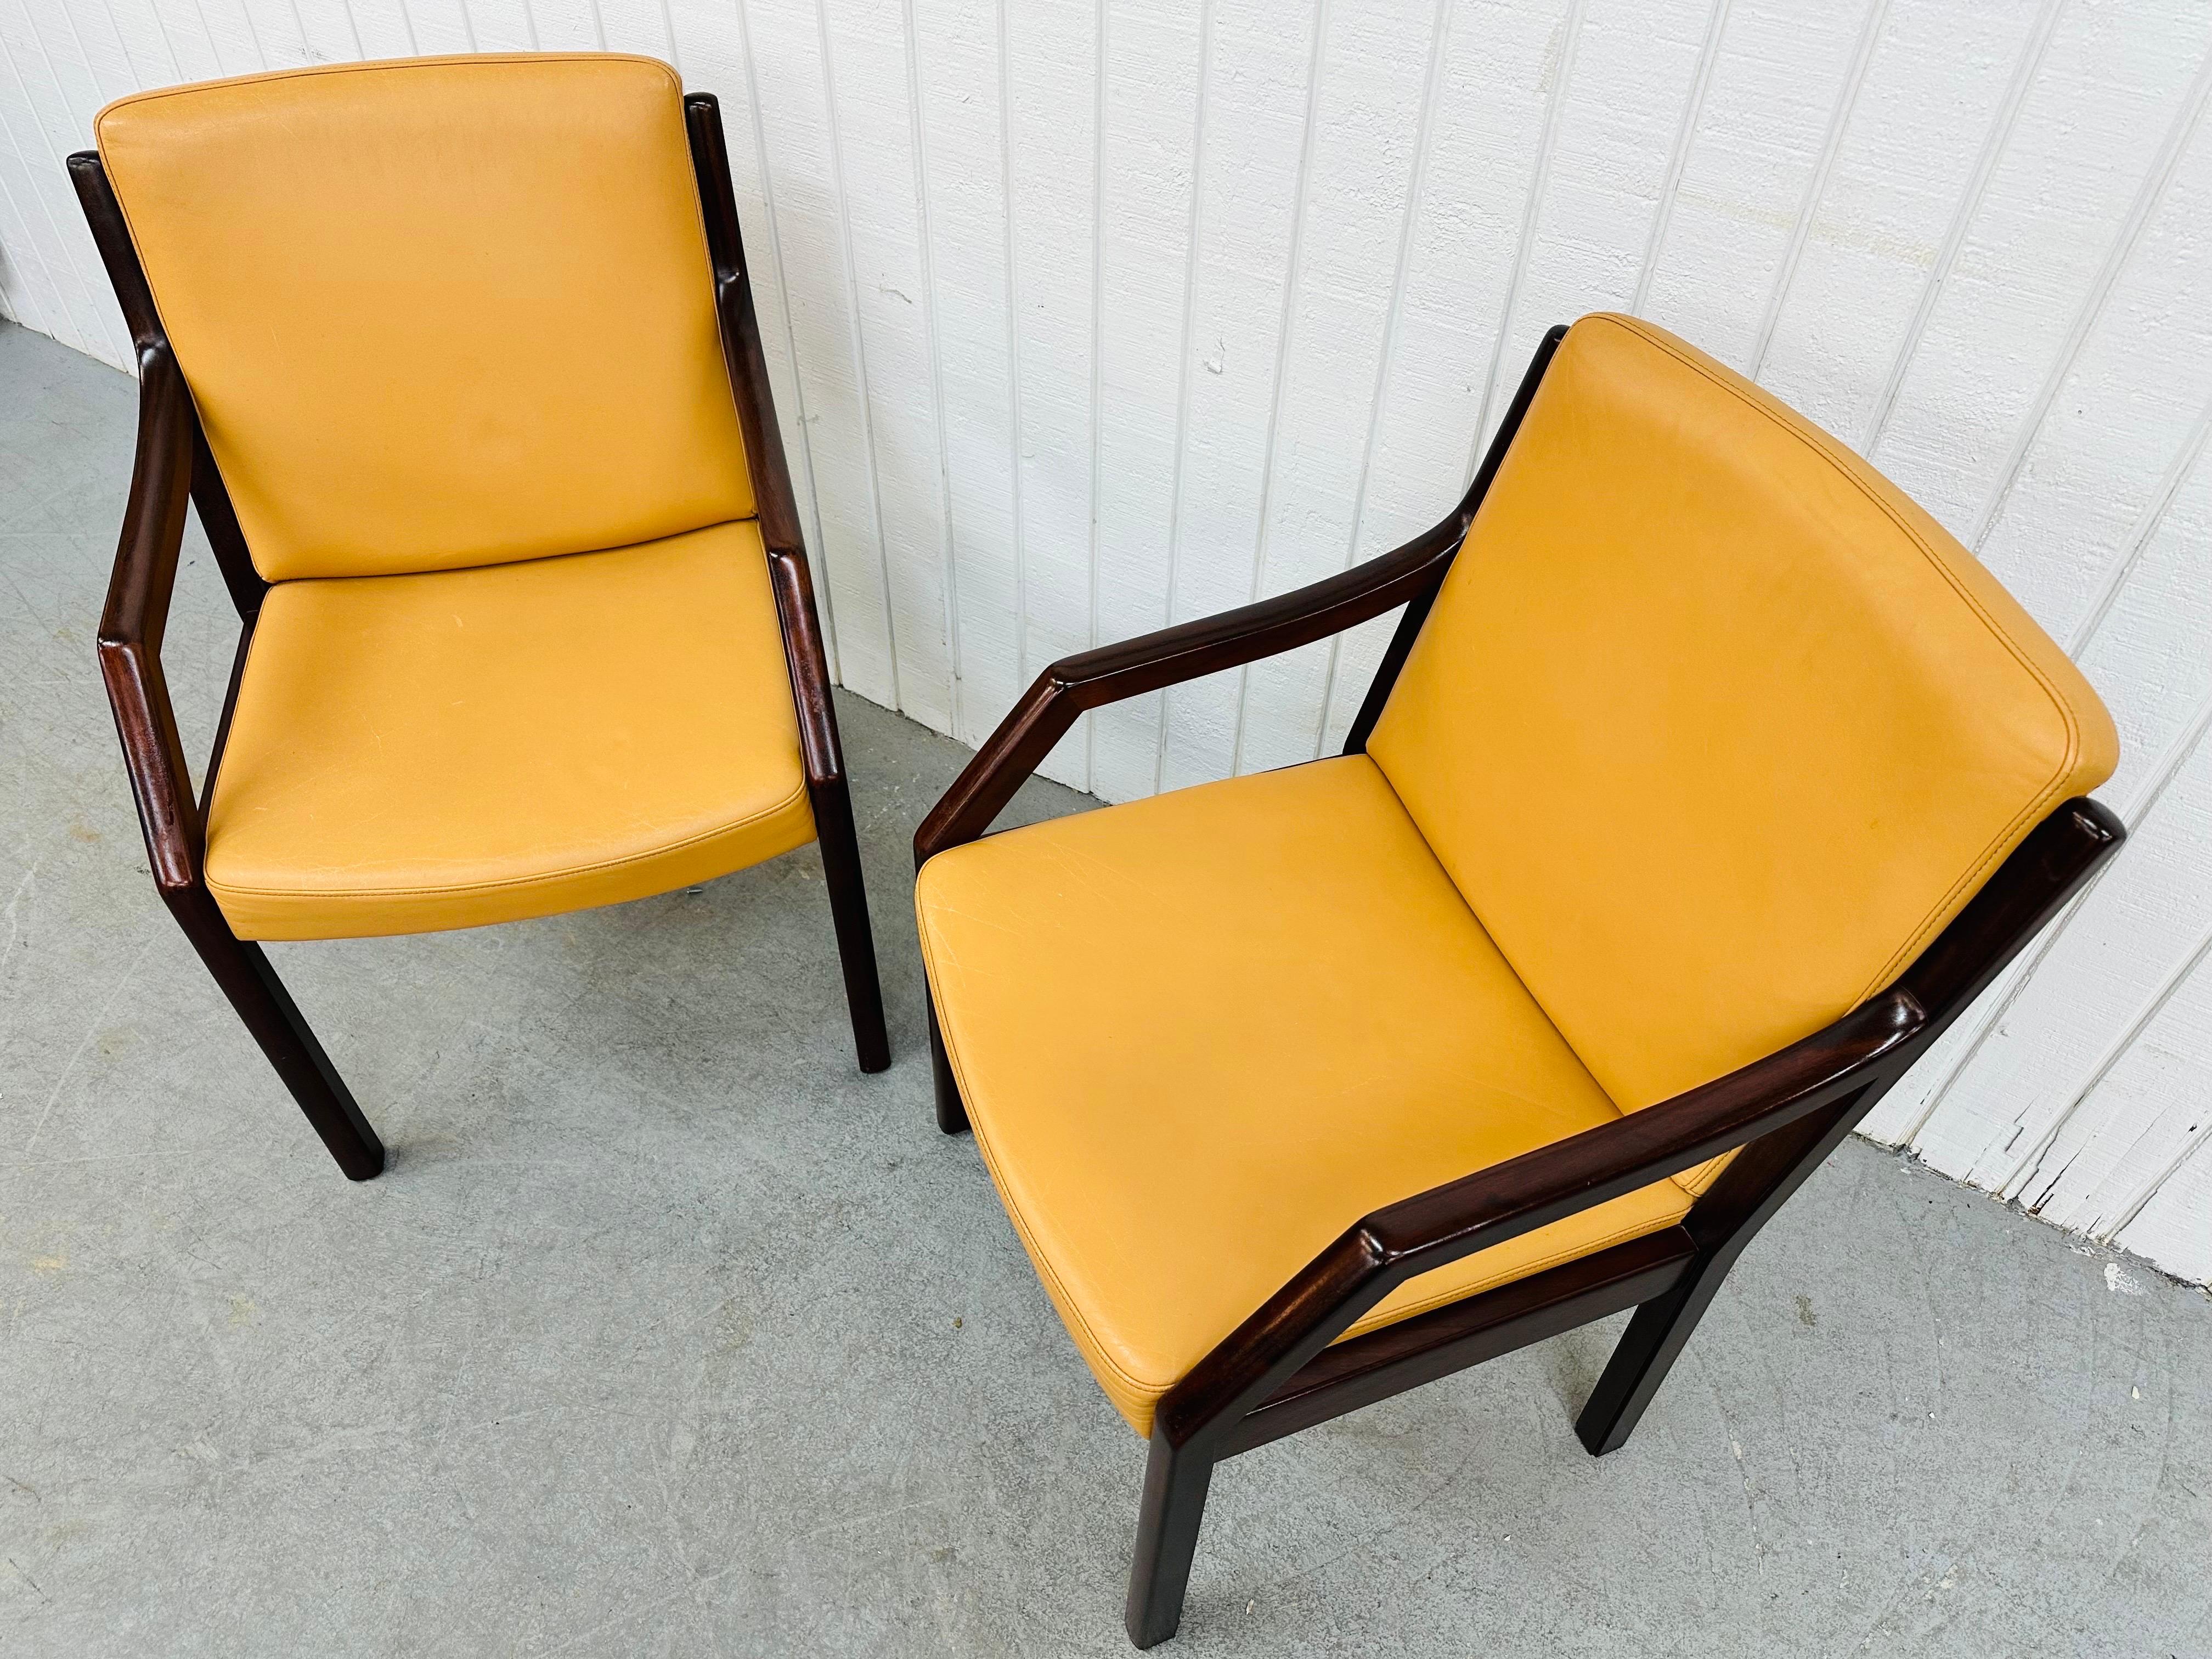 Vintage Dunbar Style Lounge Chairs - Set of 2 In Good Condition For Sale In Clarksboro, NJ